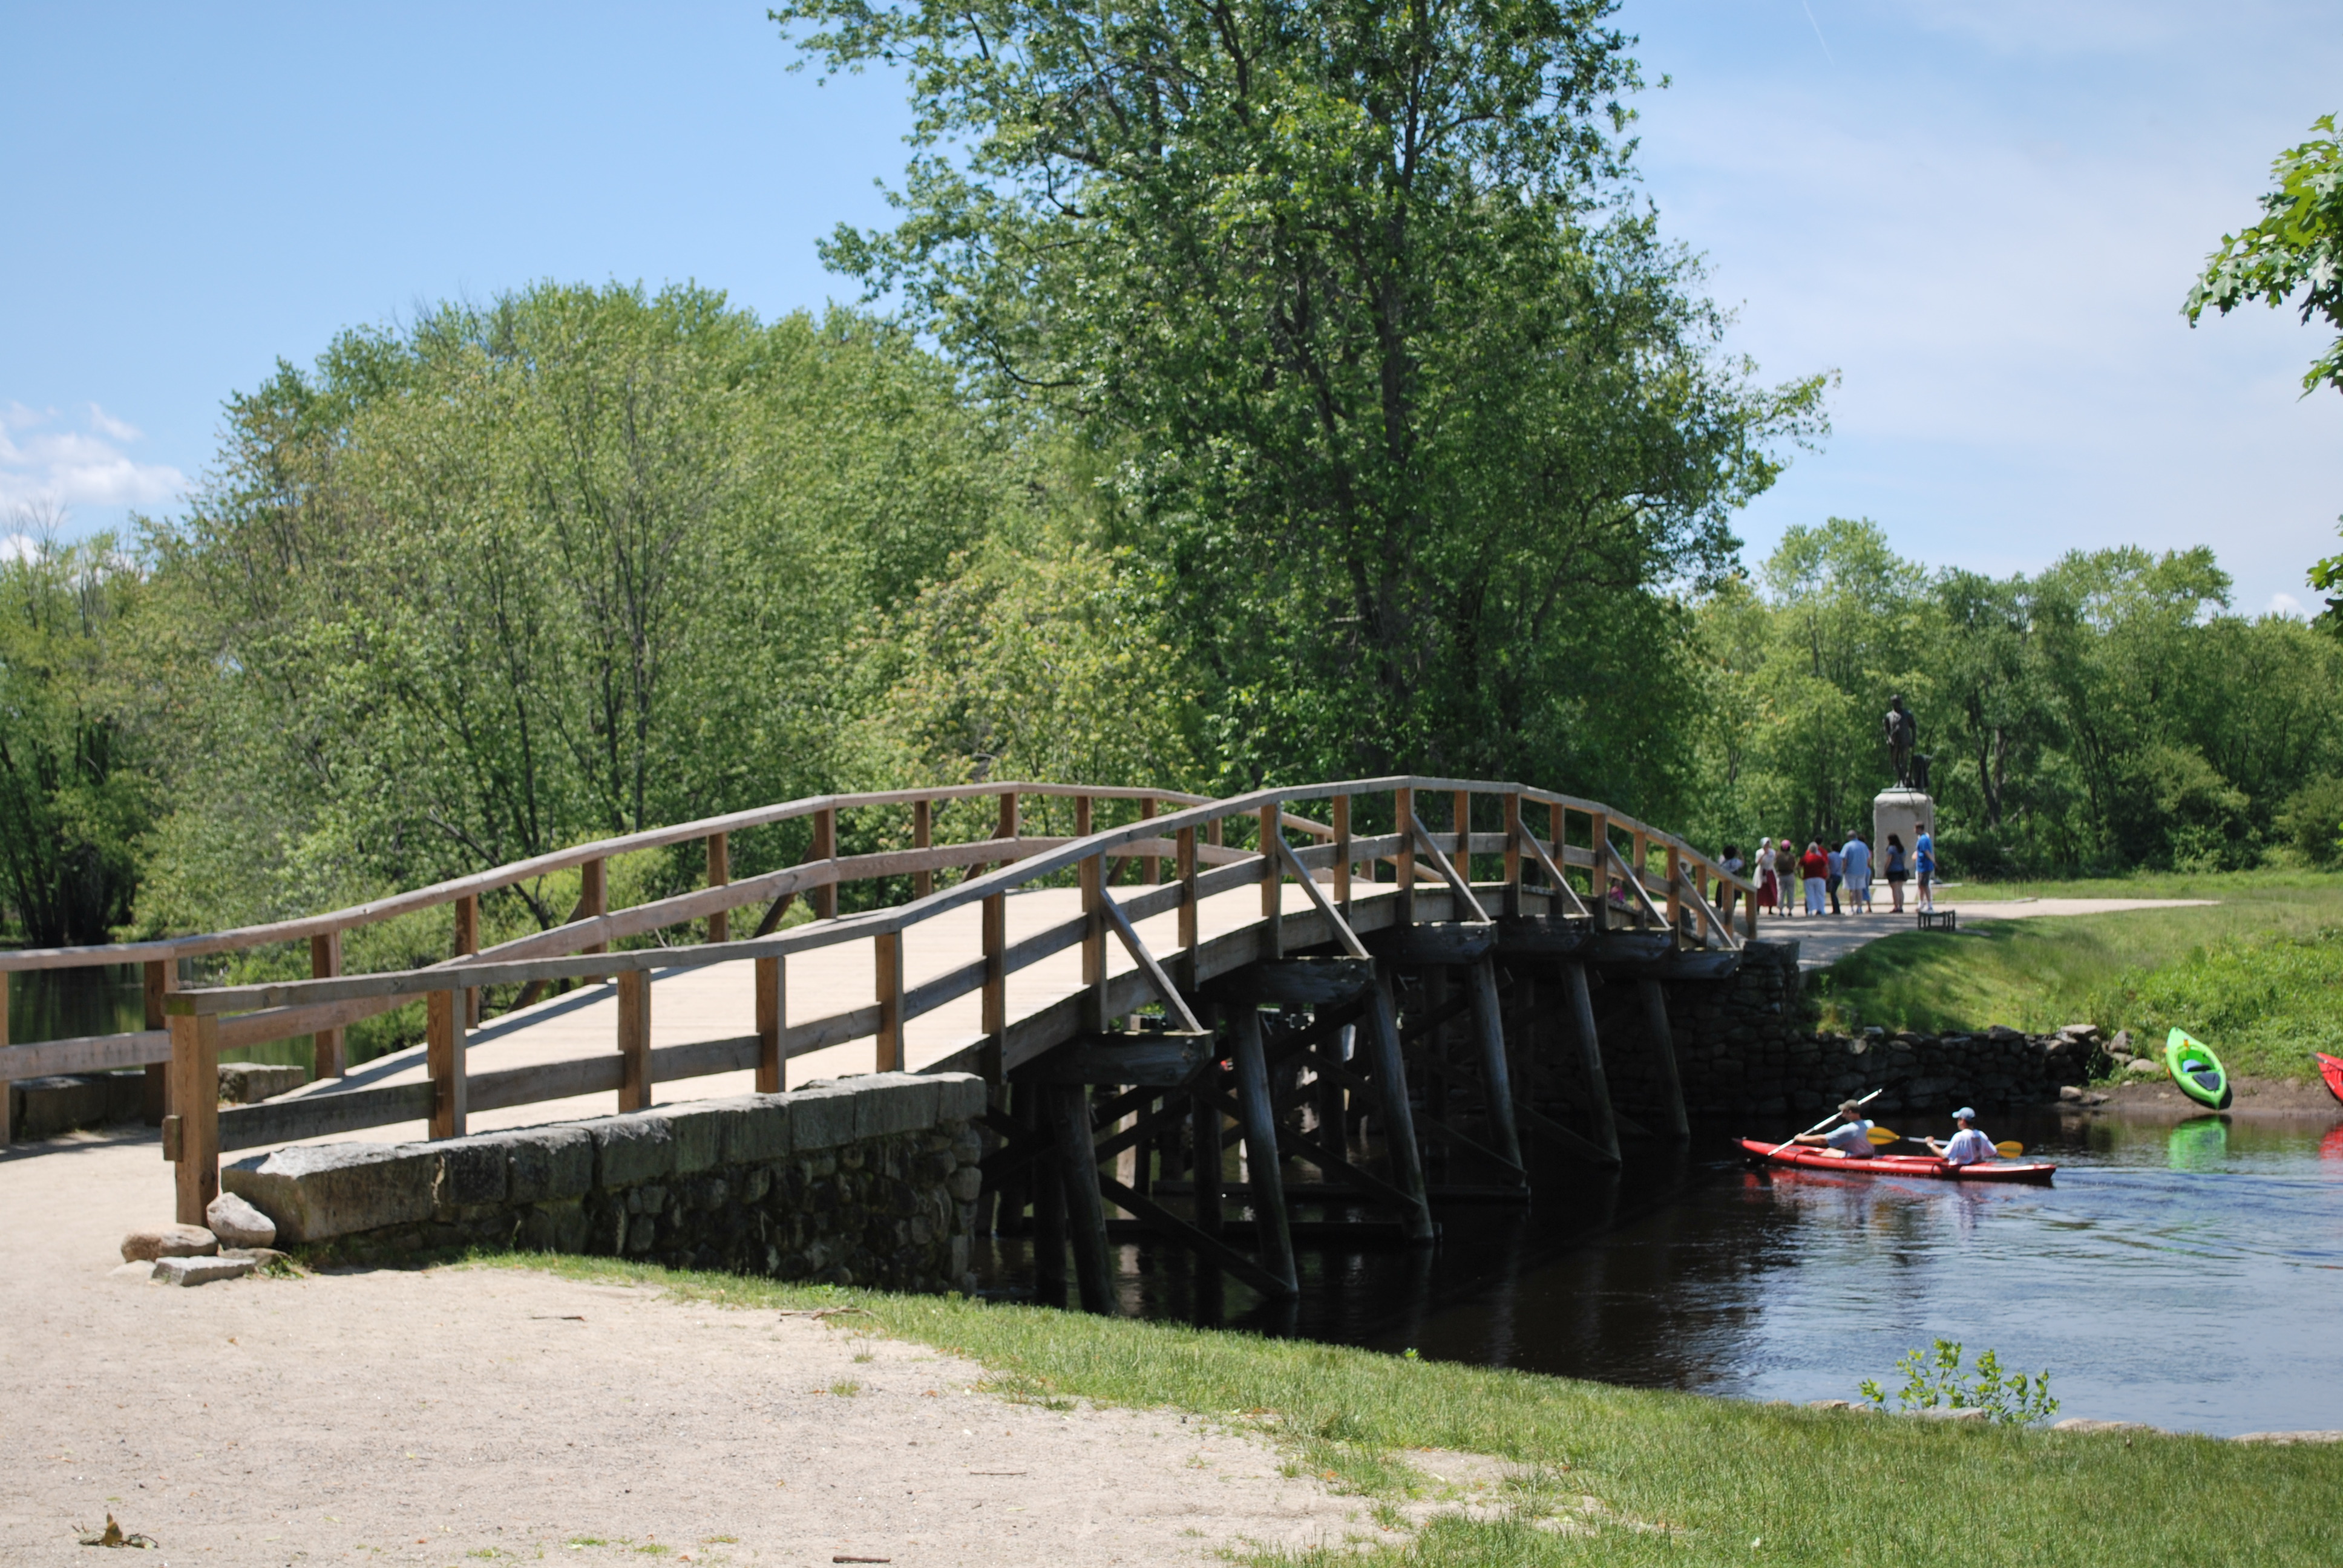 A wooden bridge spans the Concord river as people walk and canoe paddlers gluide under the bridge